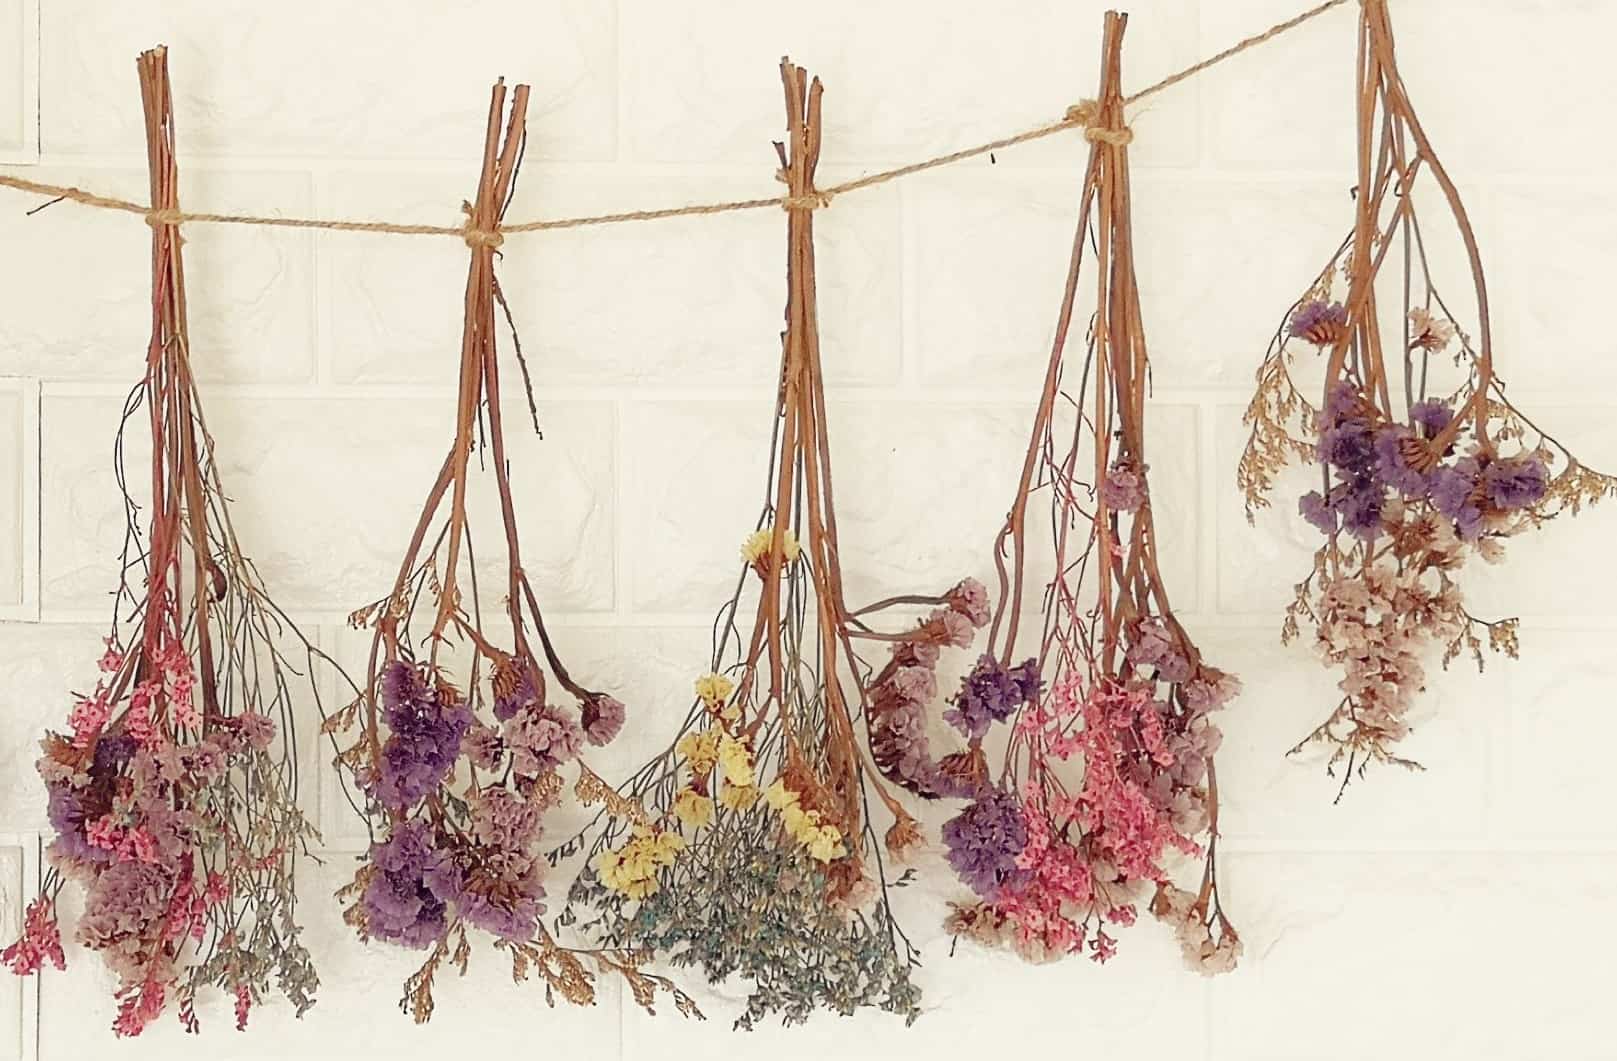 Dried Flowers hanging upside down